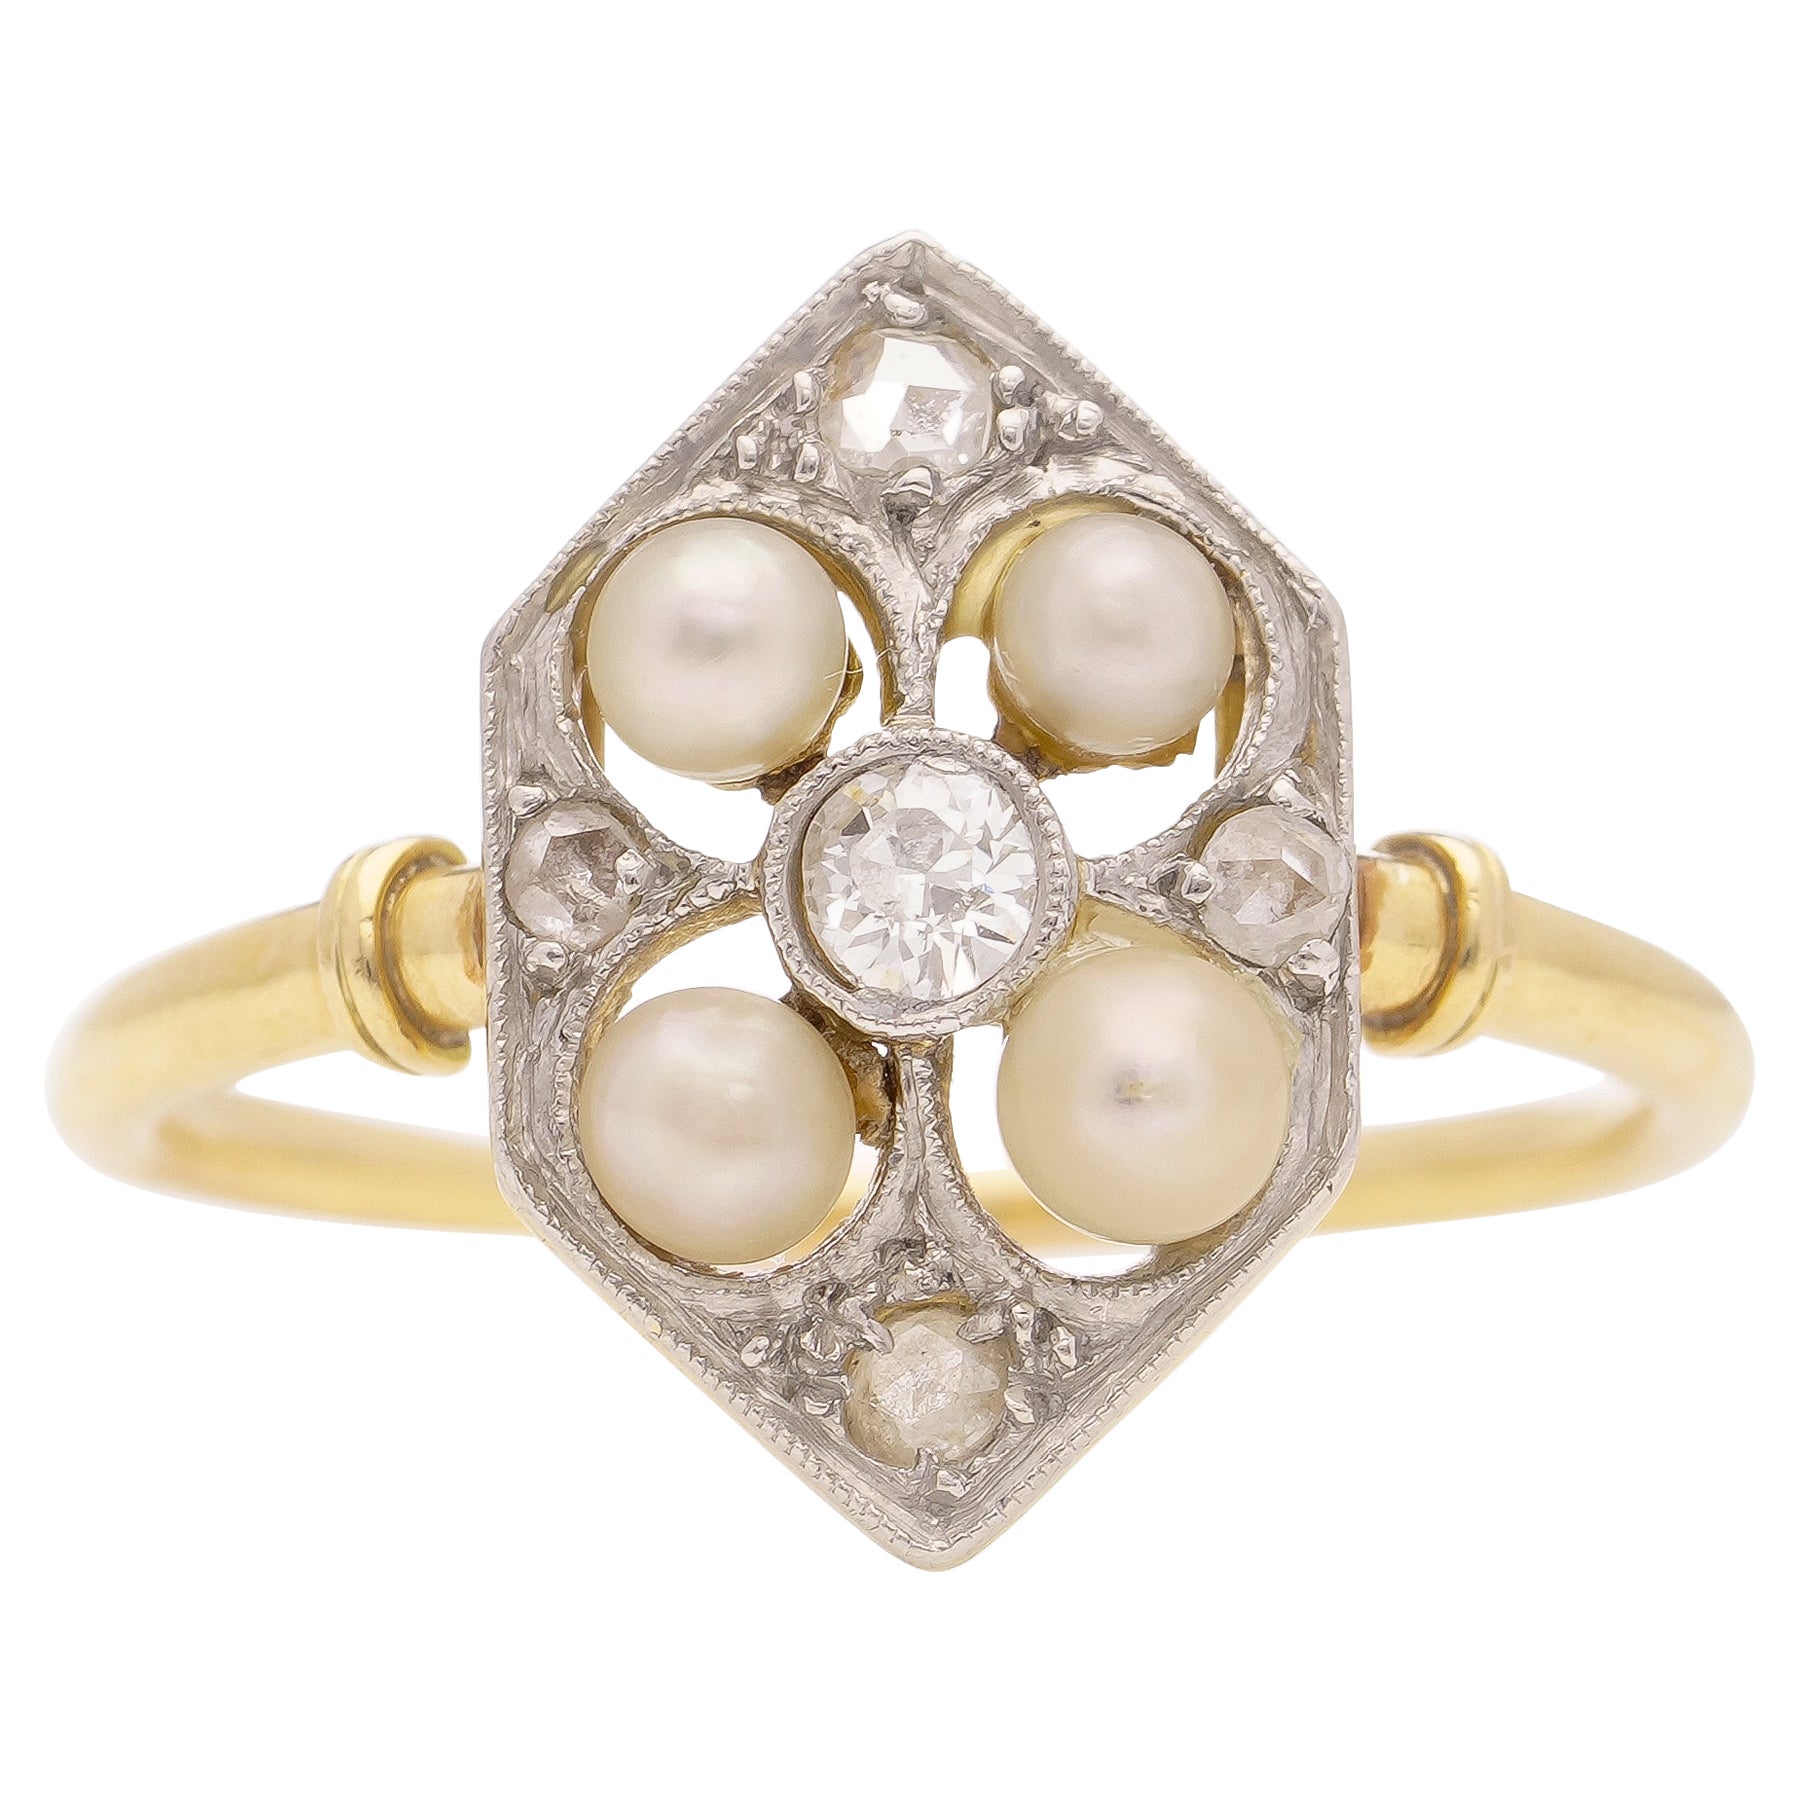 Edwardian 18kt yellow gold and platinum ladies' ring with diamonds and pearls  For Sale